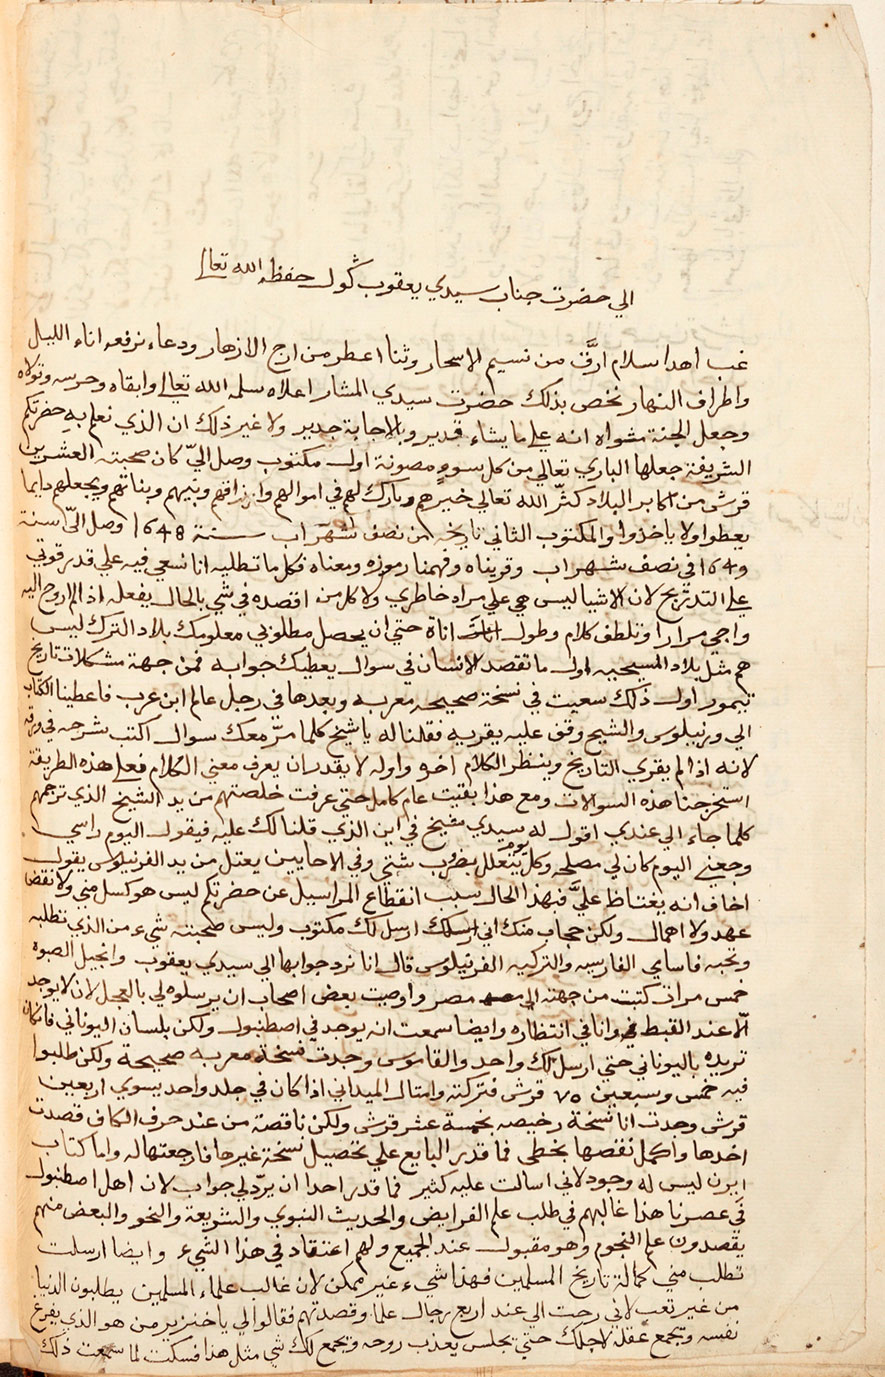 Letter from Niqulaus ibn Butrus to Golius, Istanbul 1648